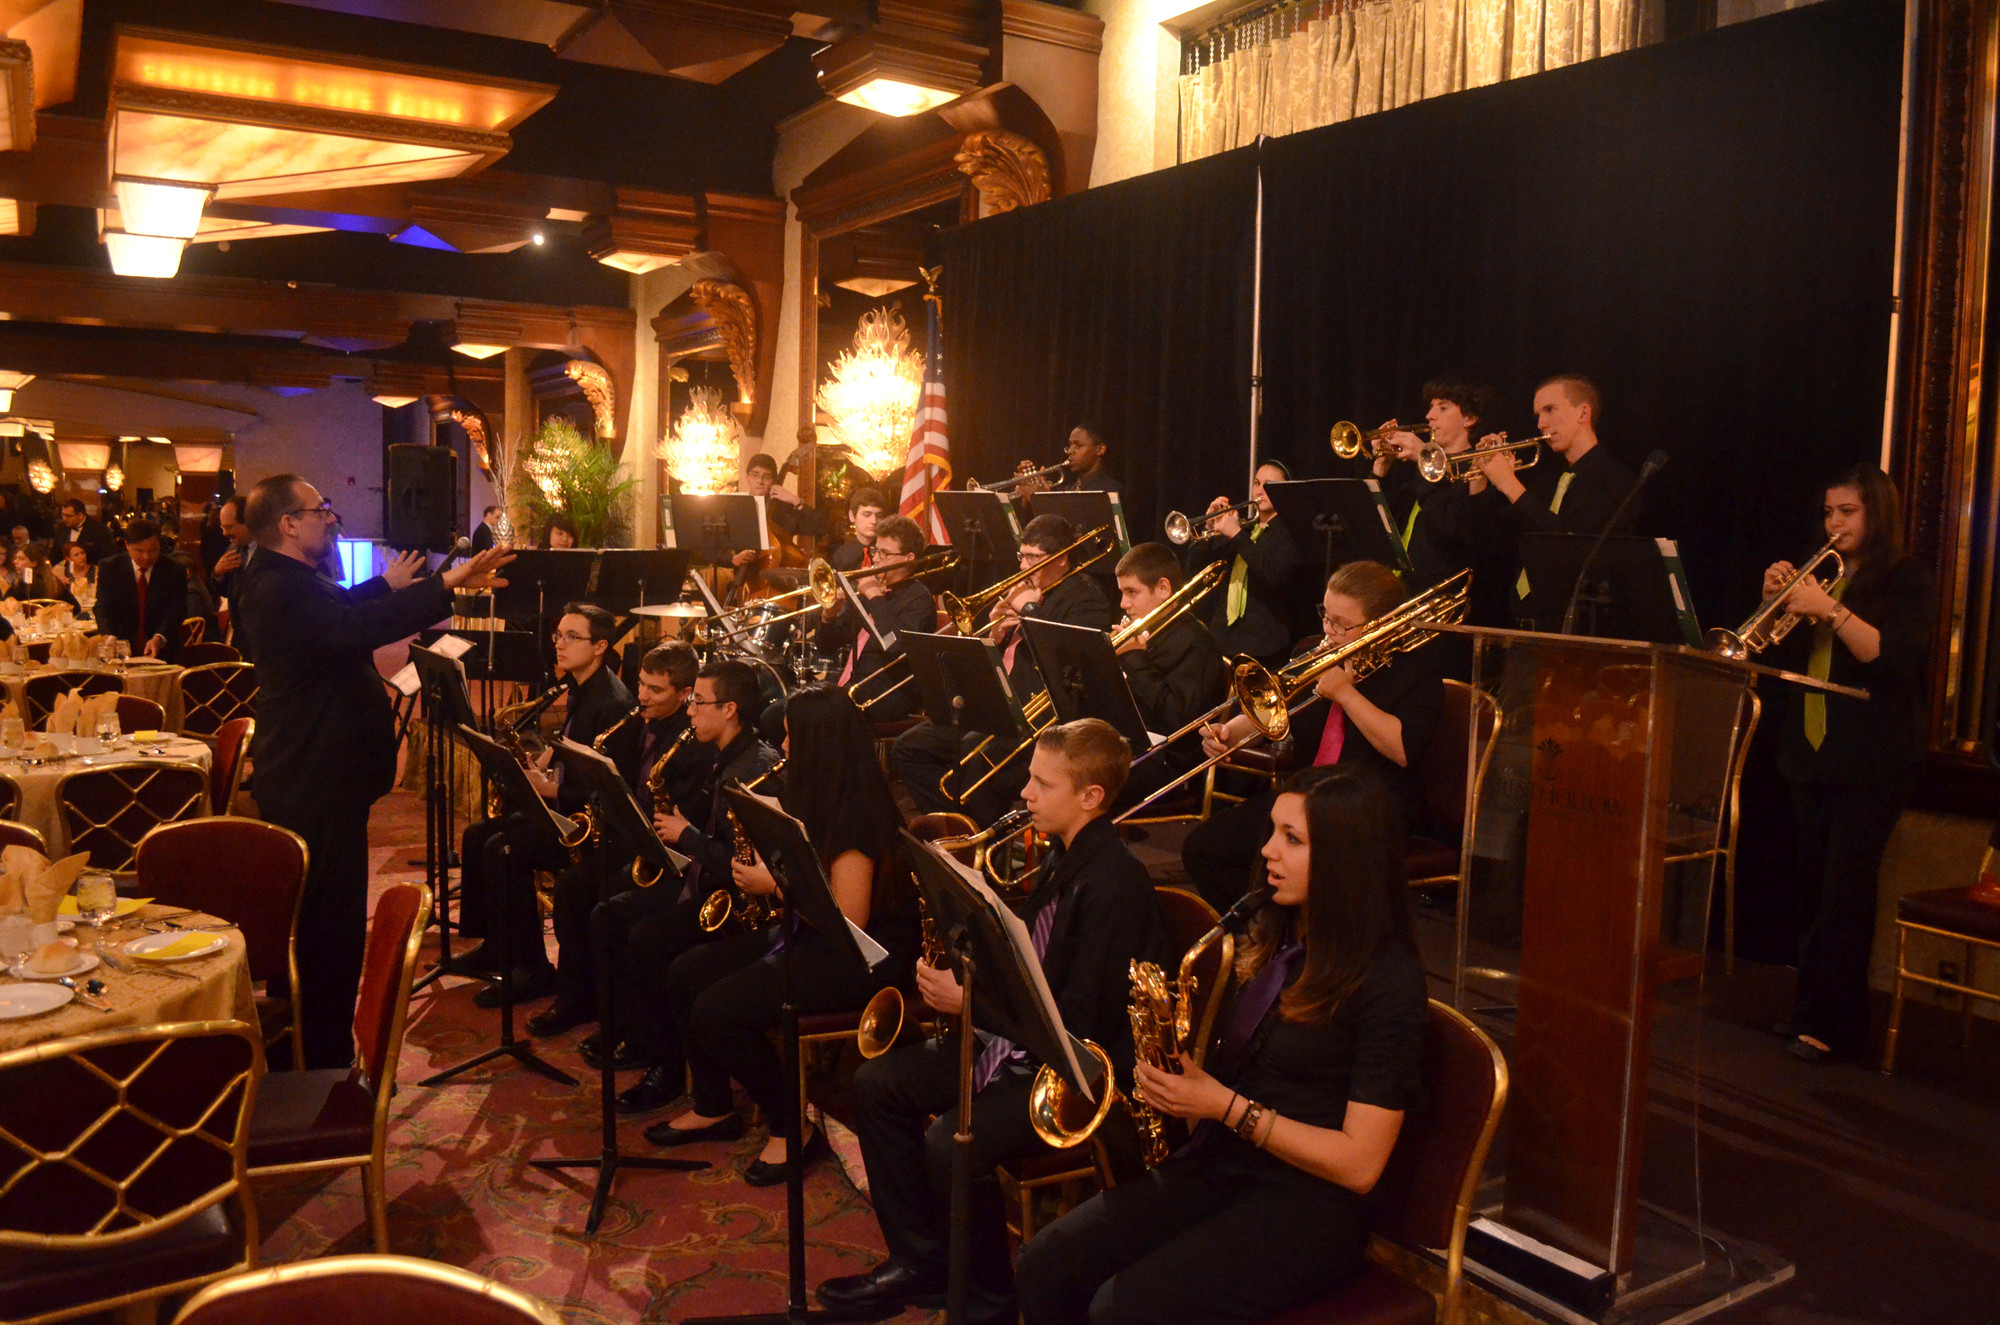 W.T. Clarke High School Jazz Ensemble under the direction of Steven Barbieri performing before the presentations.